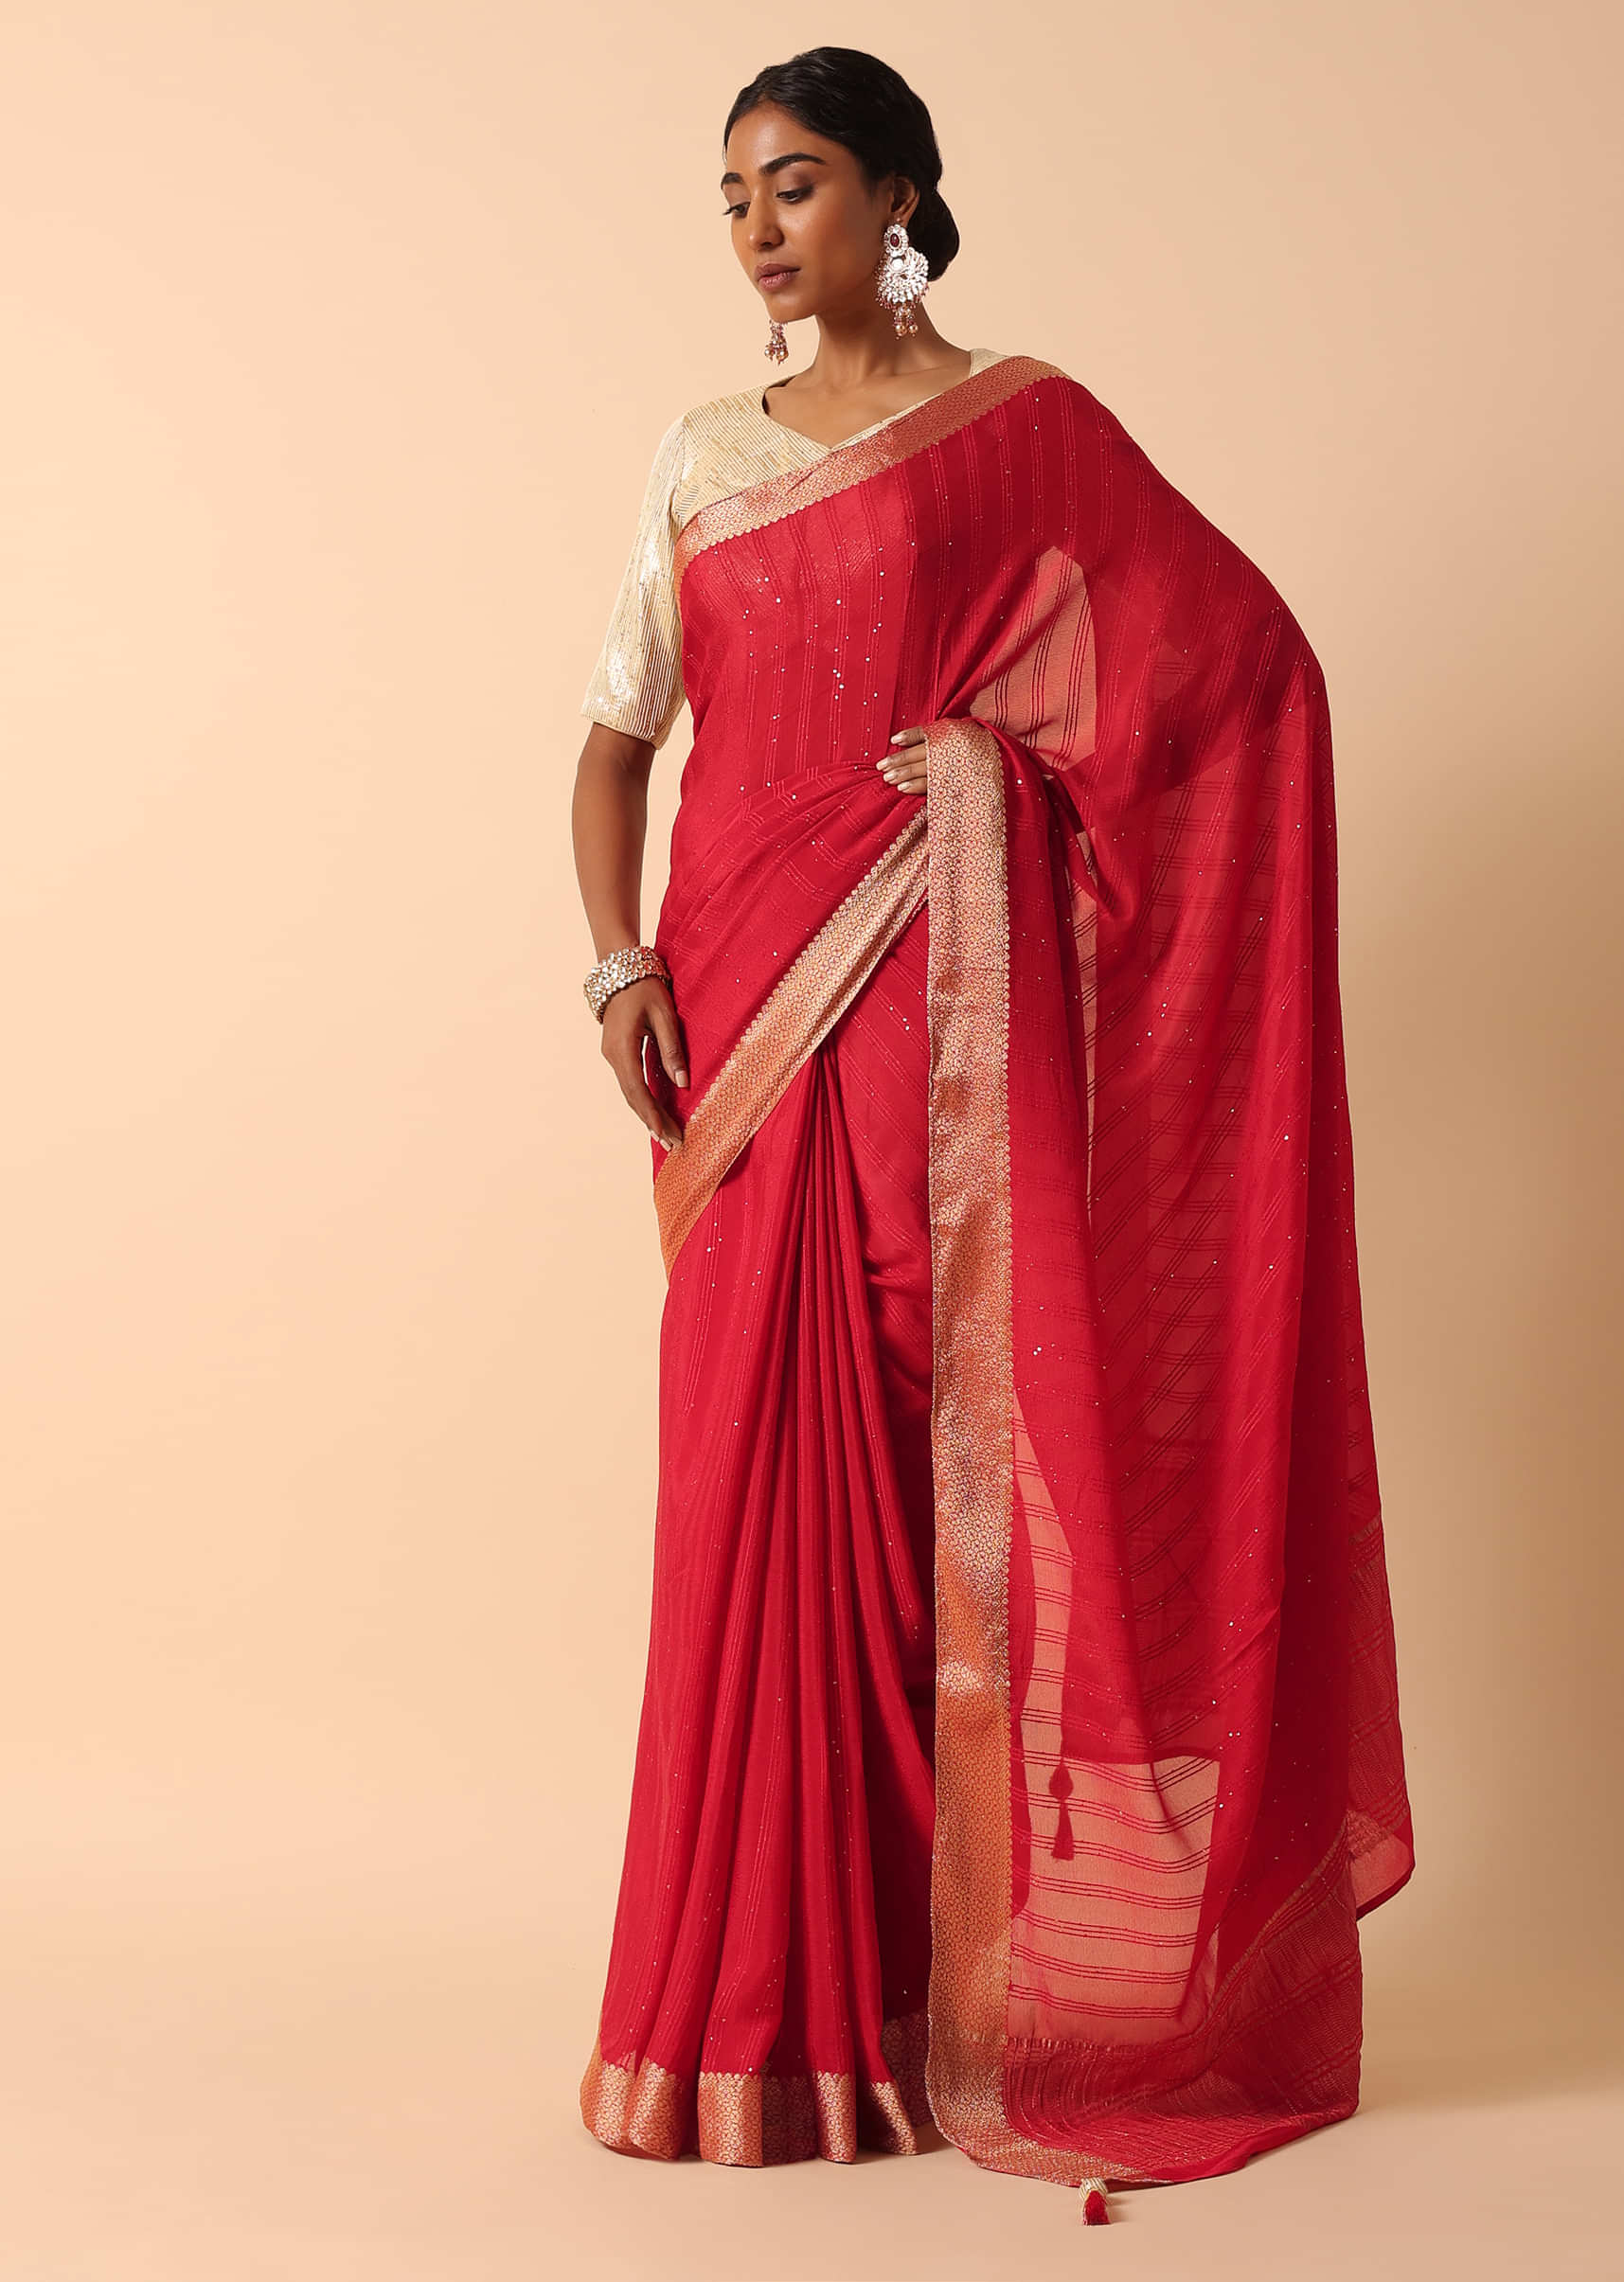 Buy Simple Plain Sarees with Latest Simple Saree Designs on Fabcurate –  Page 2